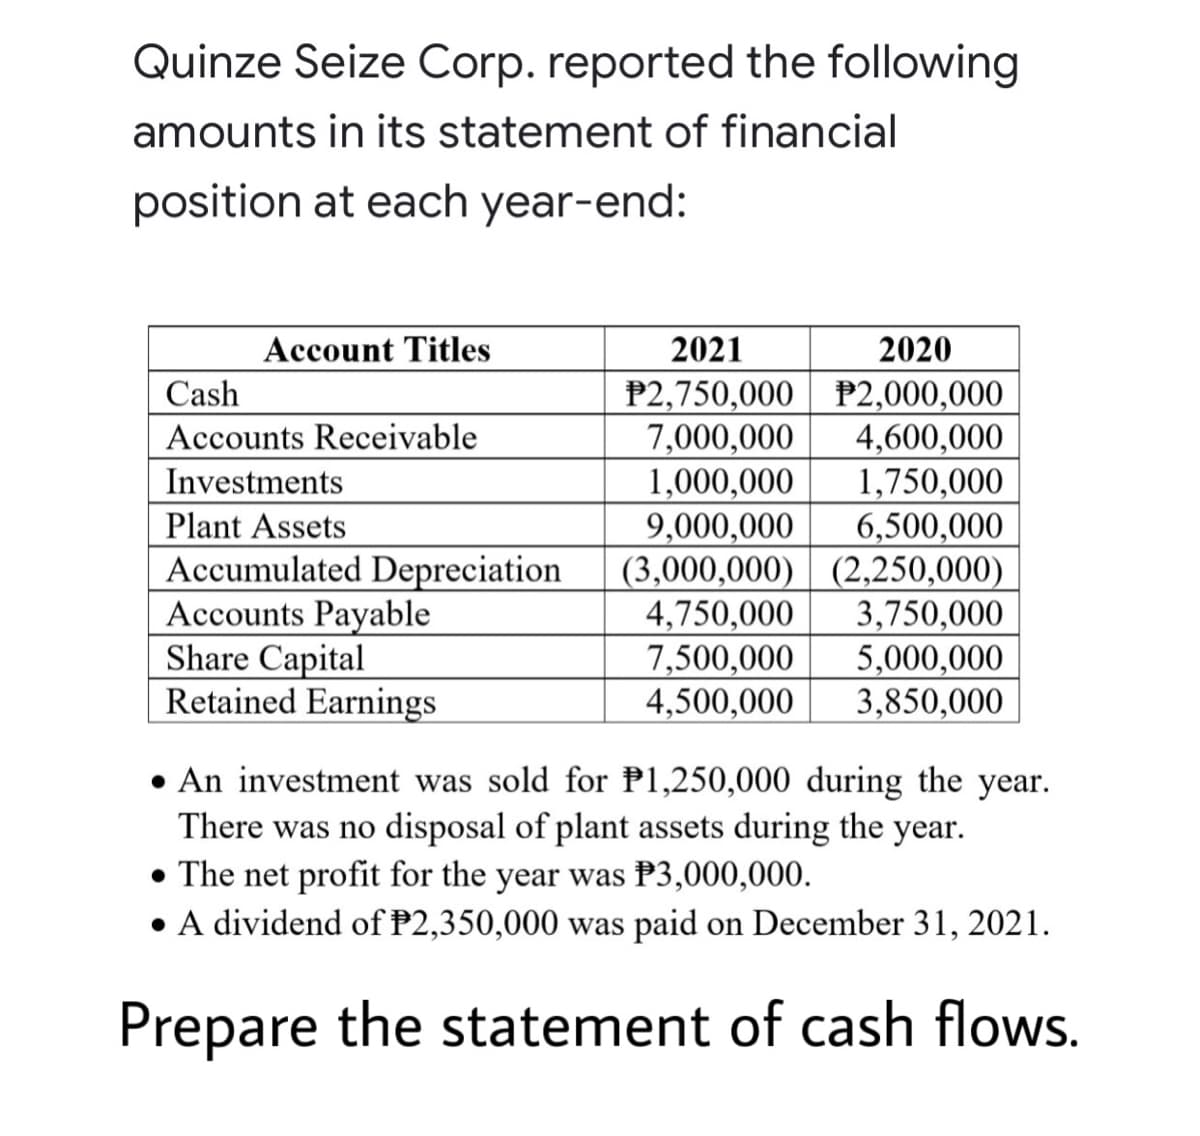 Quinze Seize Corp. reported the following
amounts in its statement of financial
position at each year-end:
Account Titles
2021
2020
Cash
Accounts Receivable
Investments
Plant Assets
P2,750,000 $2,000,000
7,000,000 4,600,000
1,000,000 1,750,000
9,000,000 6,500,000
(3,000,000) (2,250,000)
4,750,000 3,750,000
7,500,000 5,000,000
4,500,000 3,850,000
Accumulated Depreciation
Accounts Payable
Share Capital
Retained Earnings
• An investment was sold for P1,250,000 during the year.
There was no disposal of plant assets during the year.
• The net profit for the year was $3,000,000.
• A dividend of P2,350,000 was paid on December 31, 2021.
Prepare the statement of cash flows.